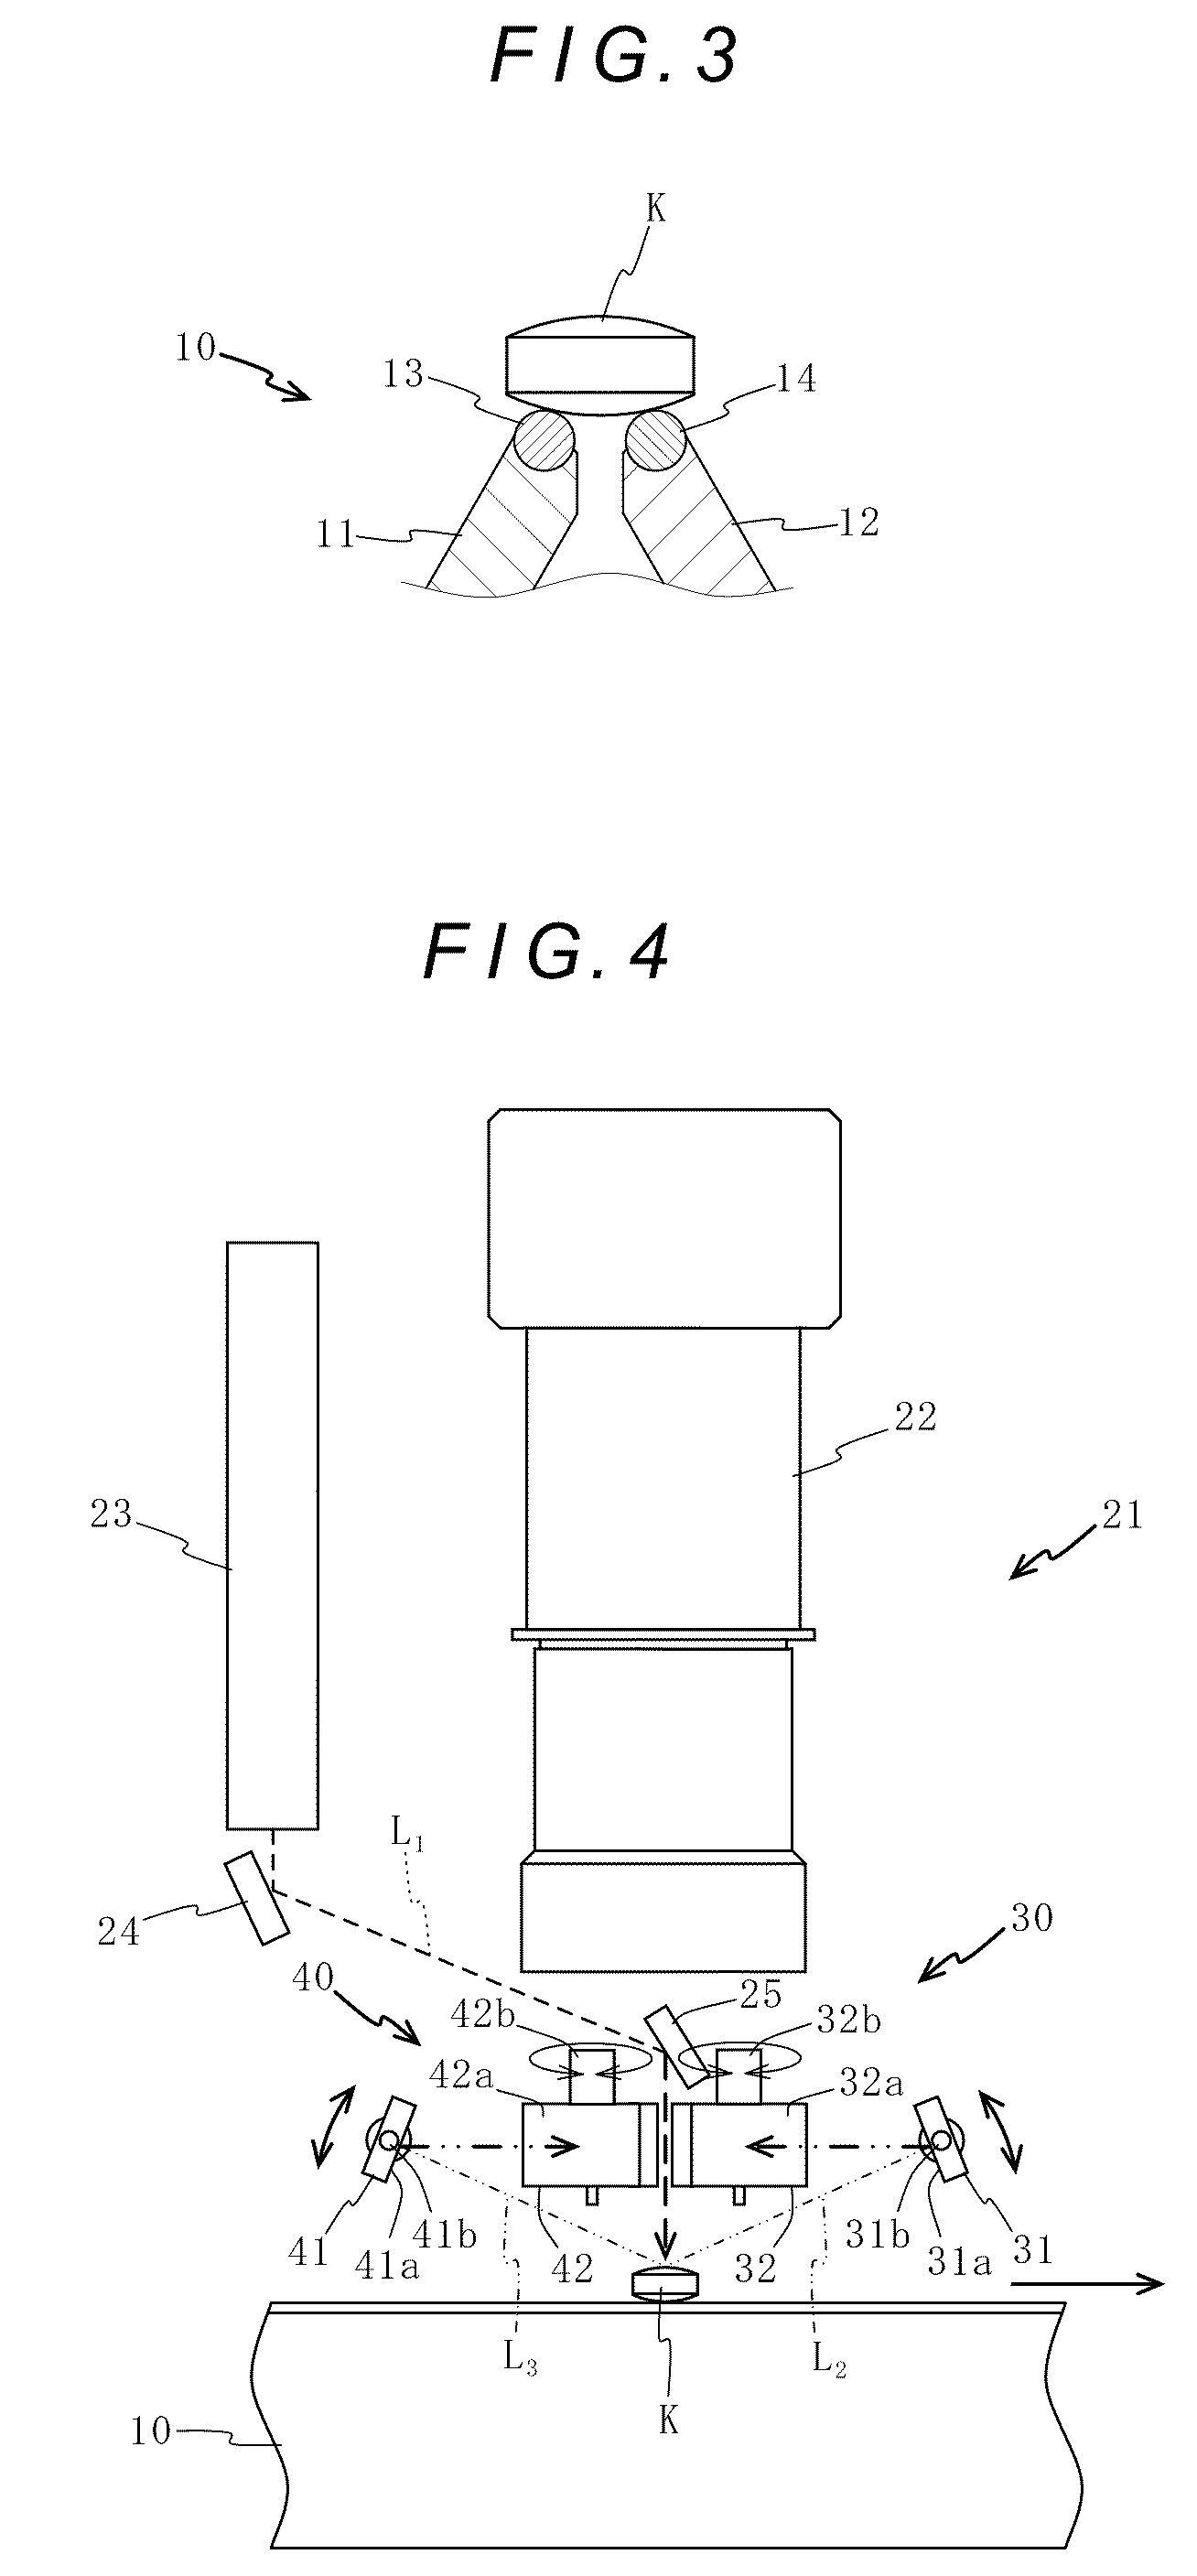 Appearance inspection apparatus